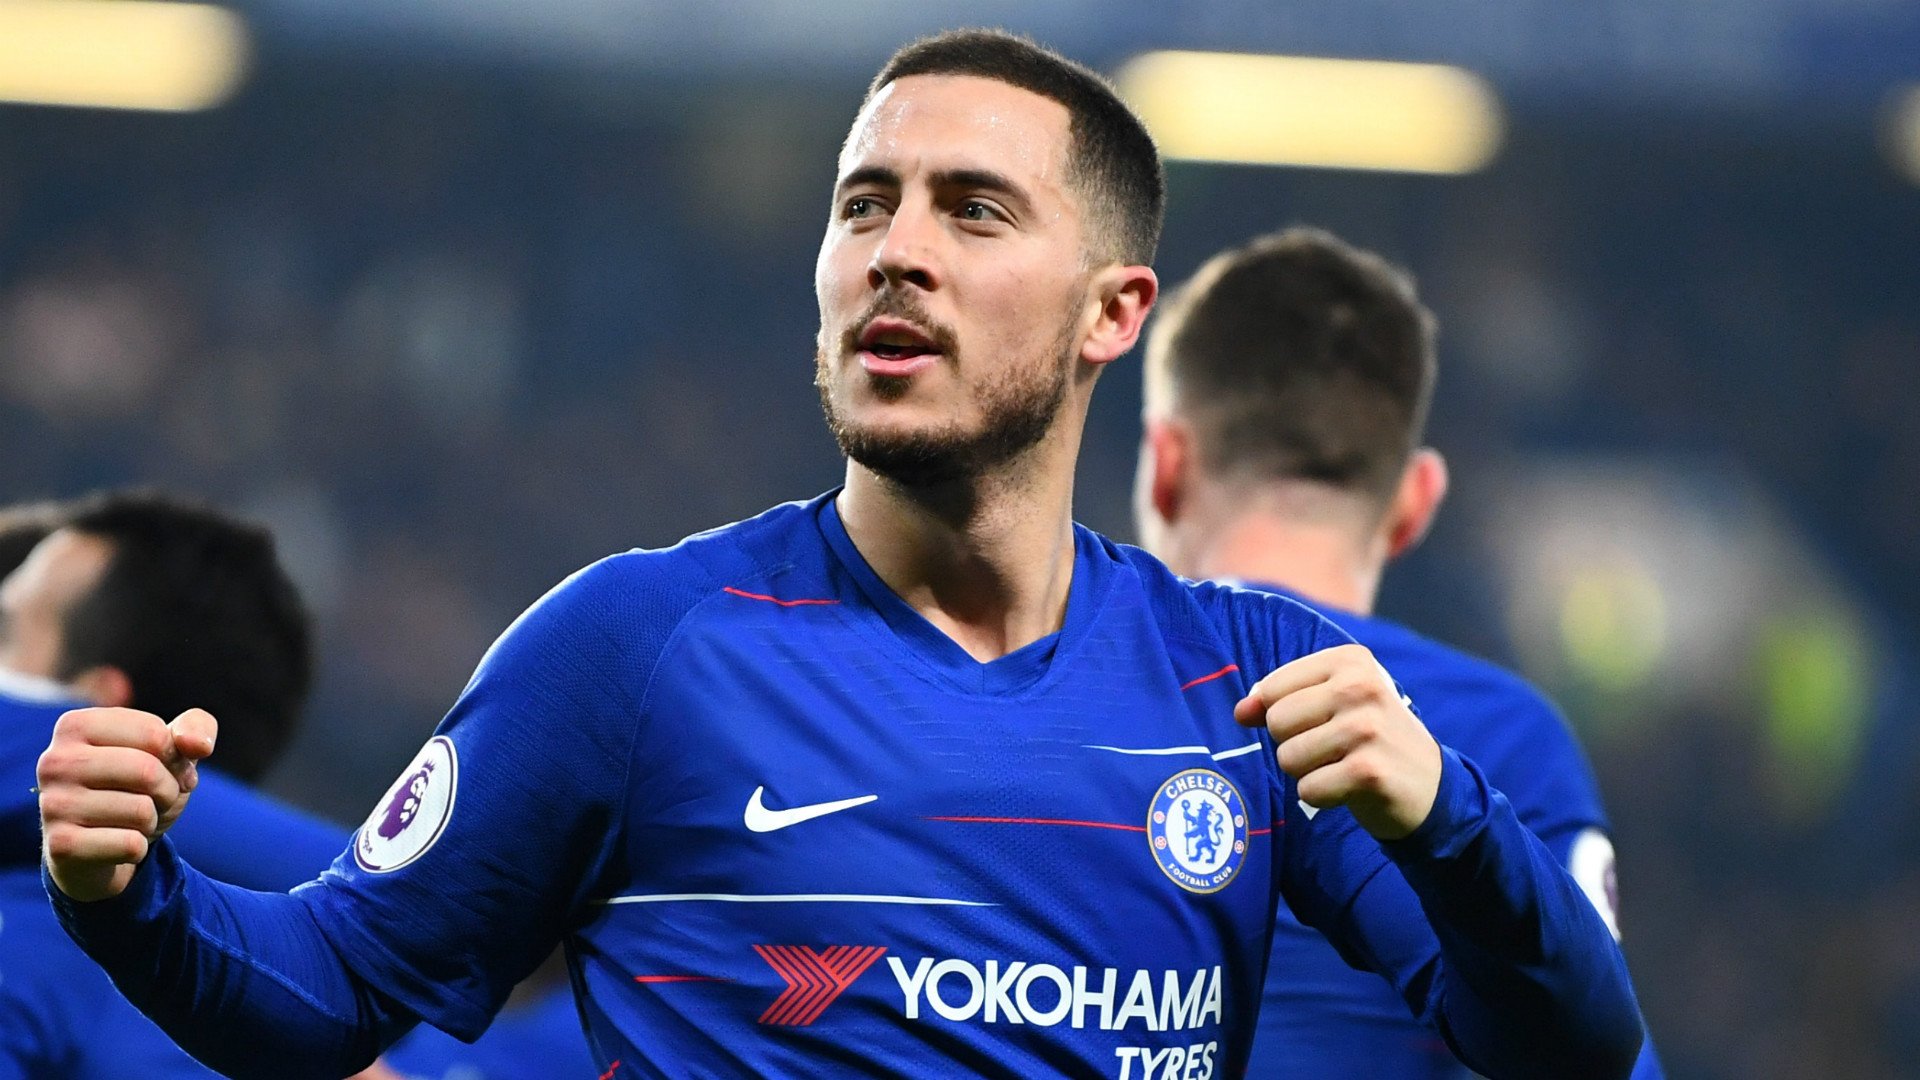 Andy Gray reveals what he's heard about who Chelsea might sign to replace Eden Hazard - Bóng Đá